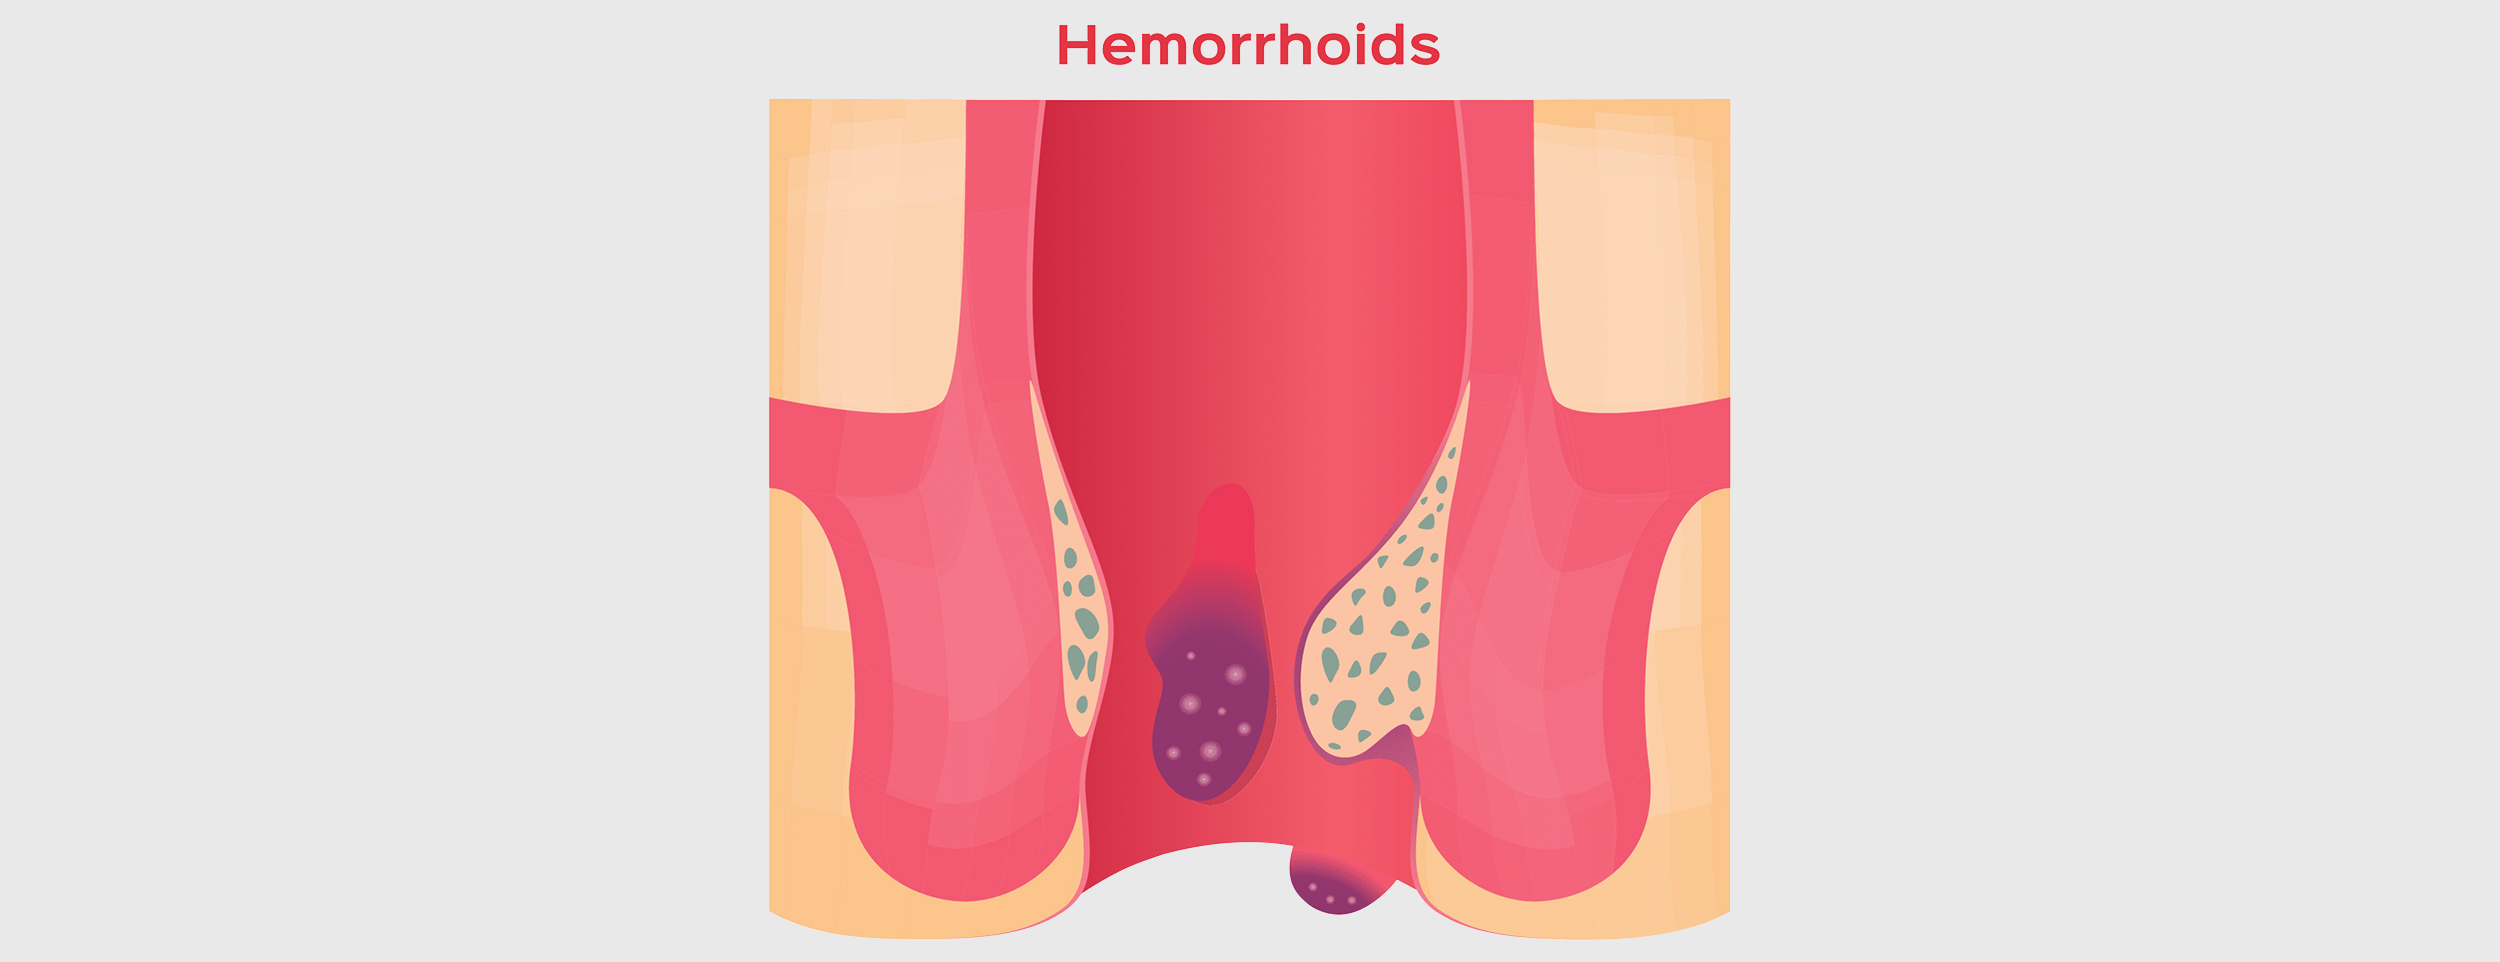 The anal area is blocked with hemorrhoids